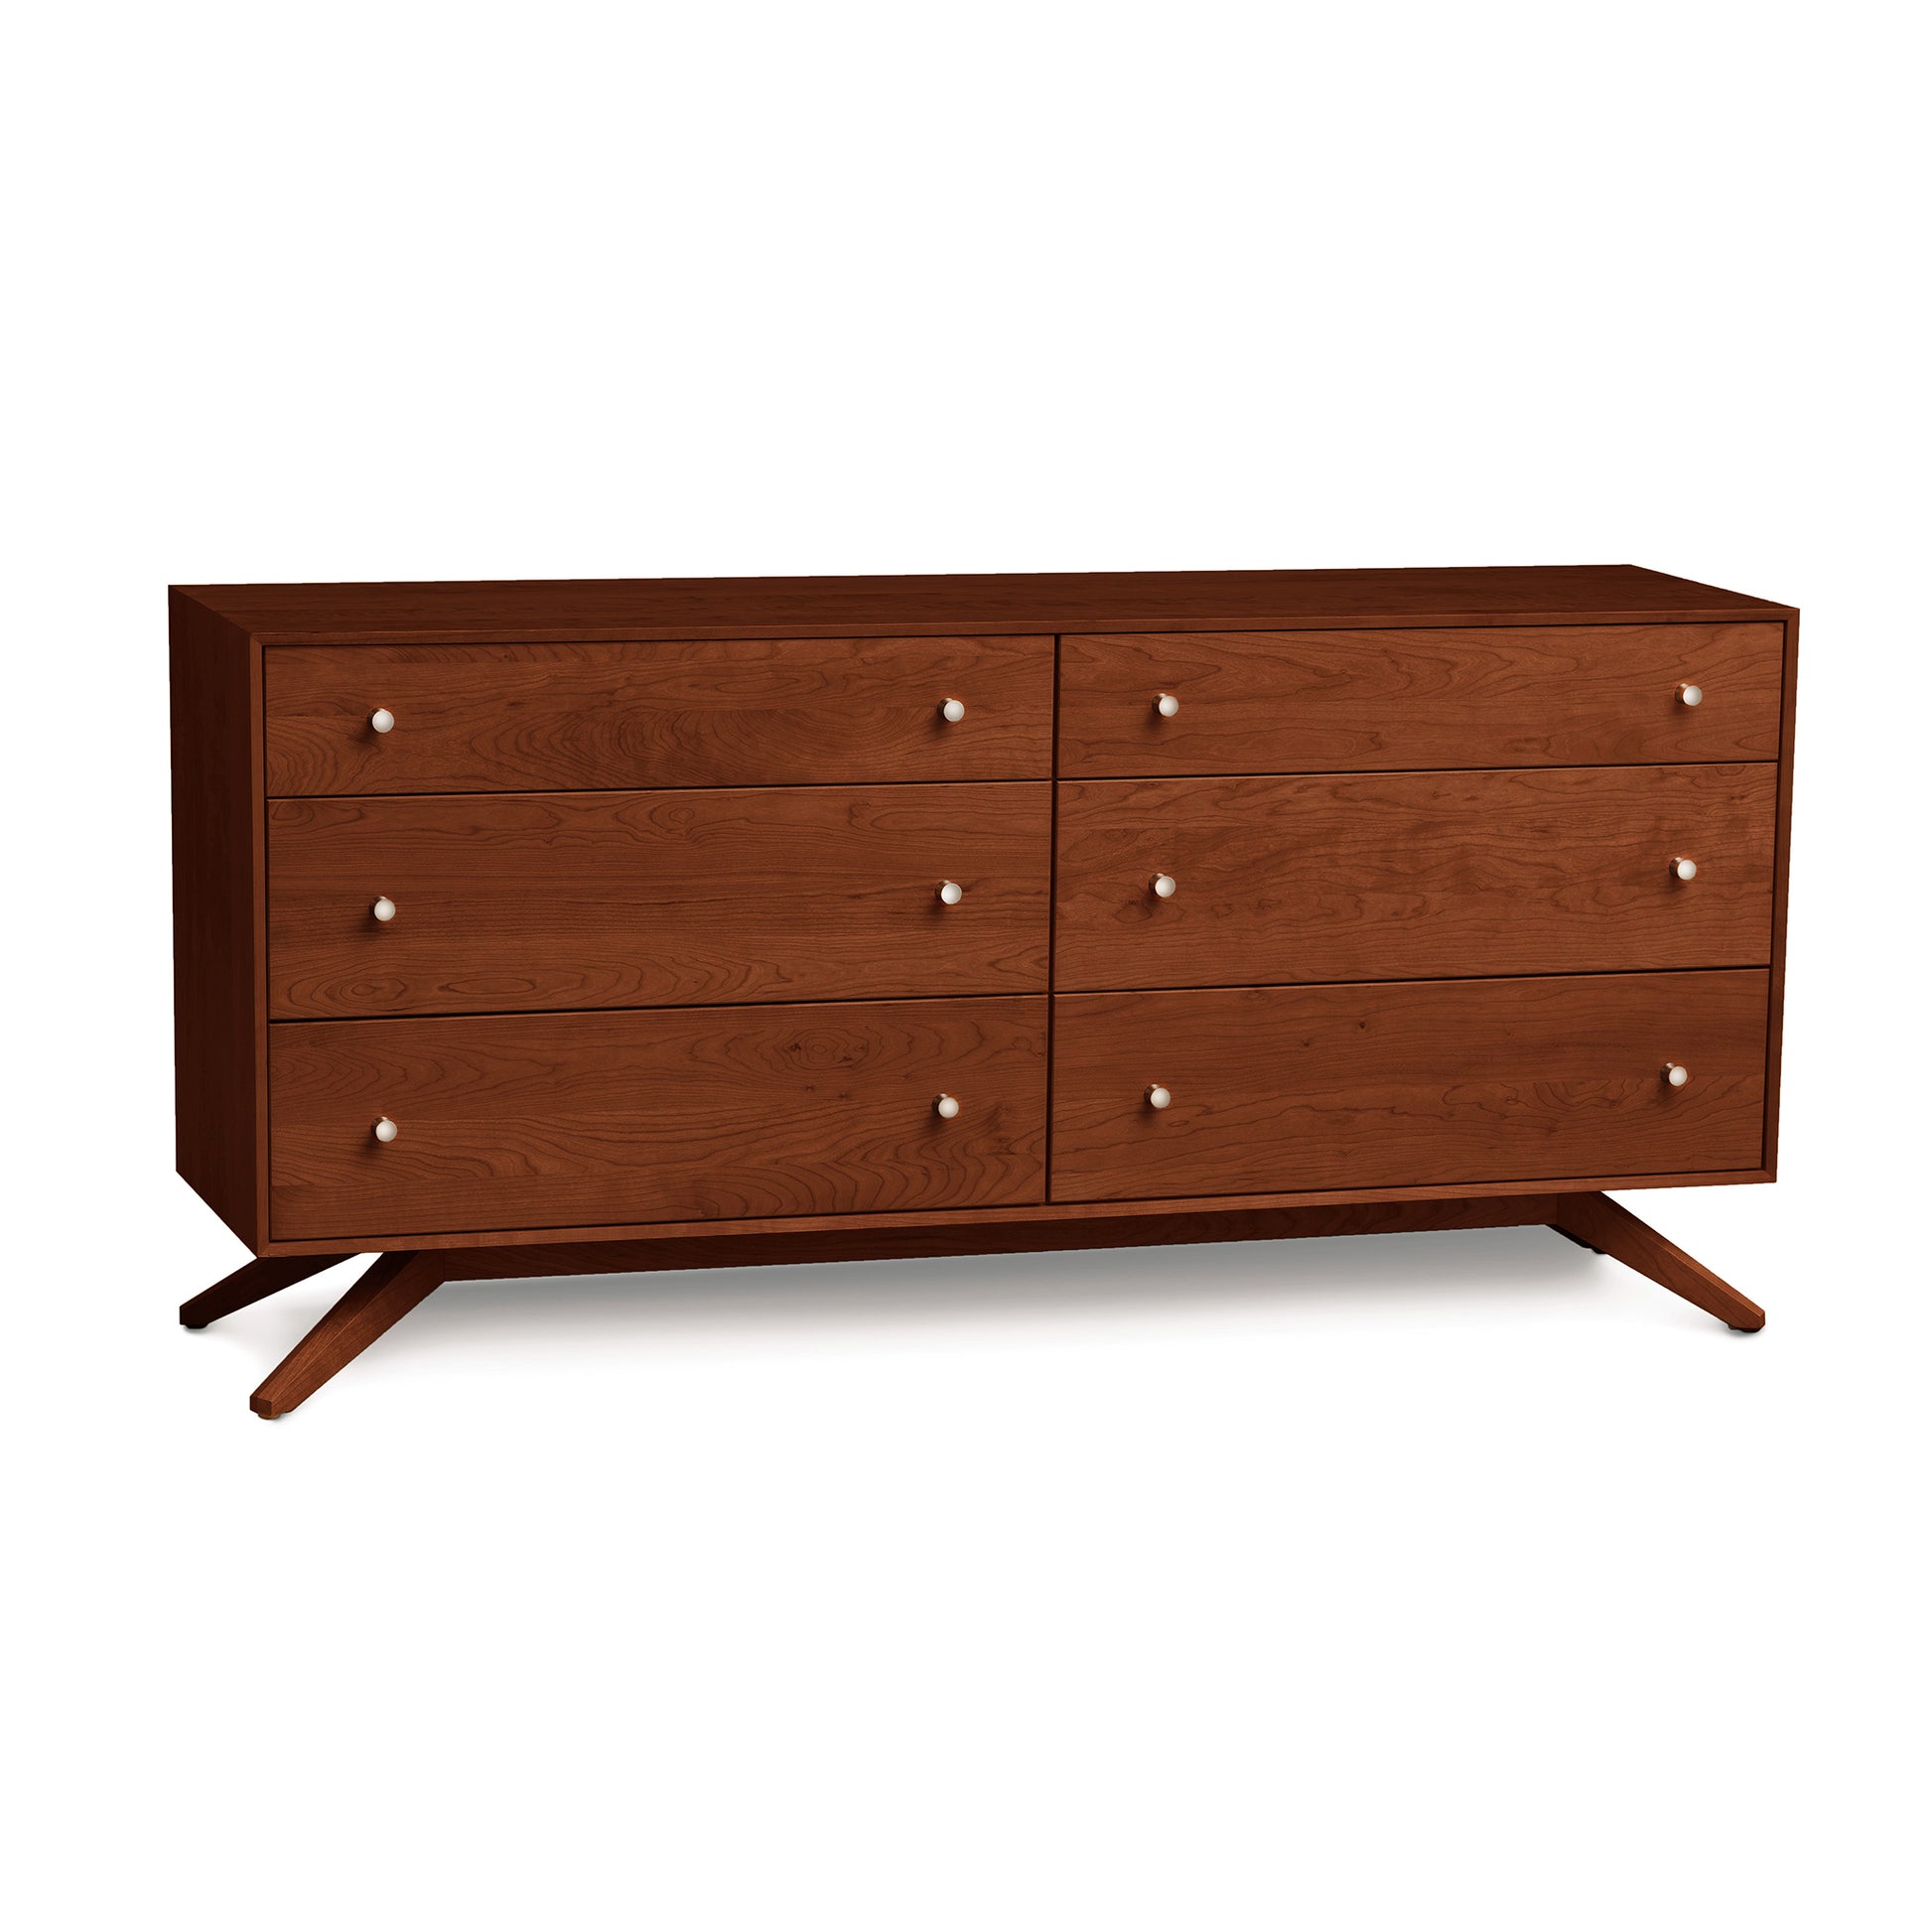 A cherry wooden Astrid 6-Drawer Dresser with angled legs on a white background by Copeland Furniture.